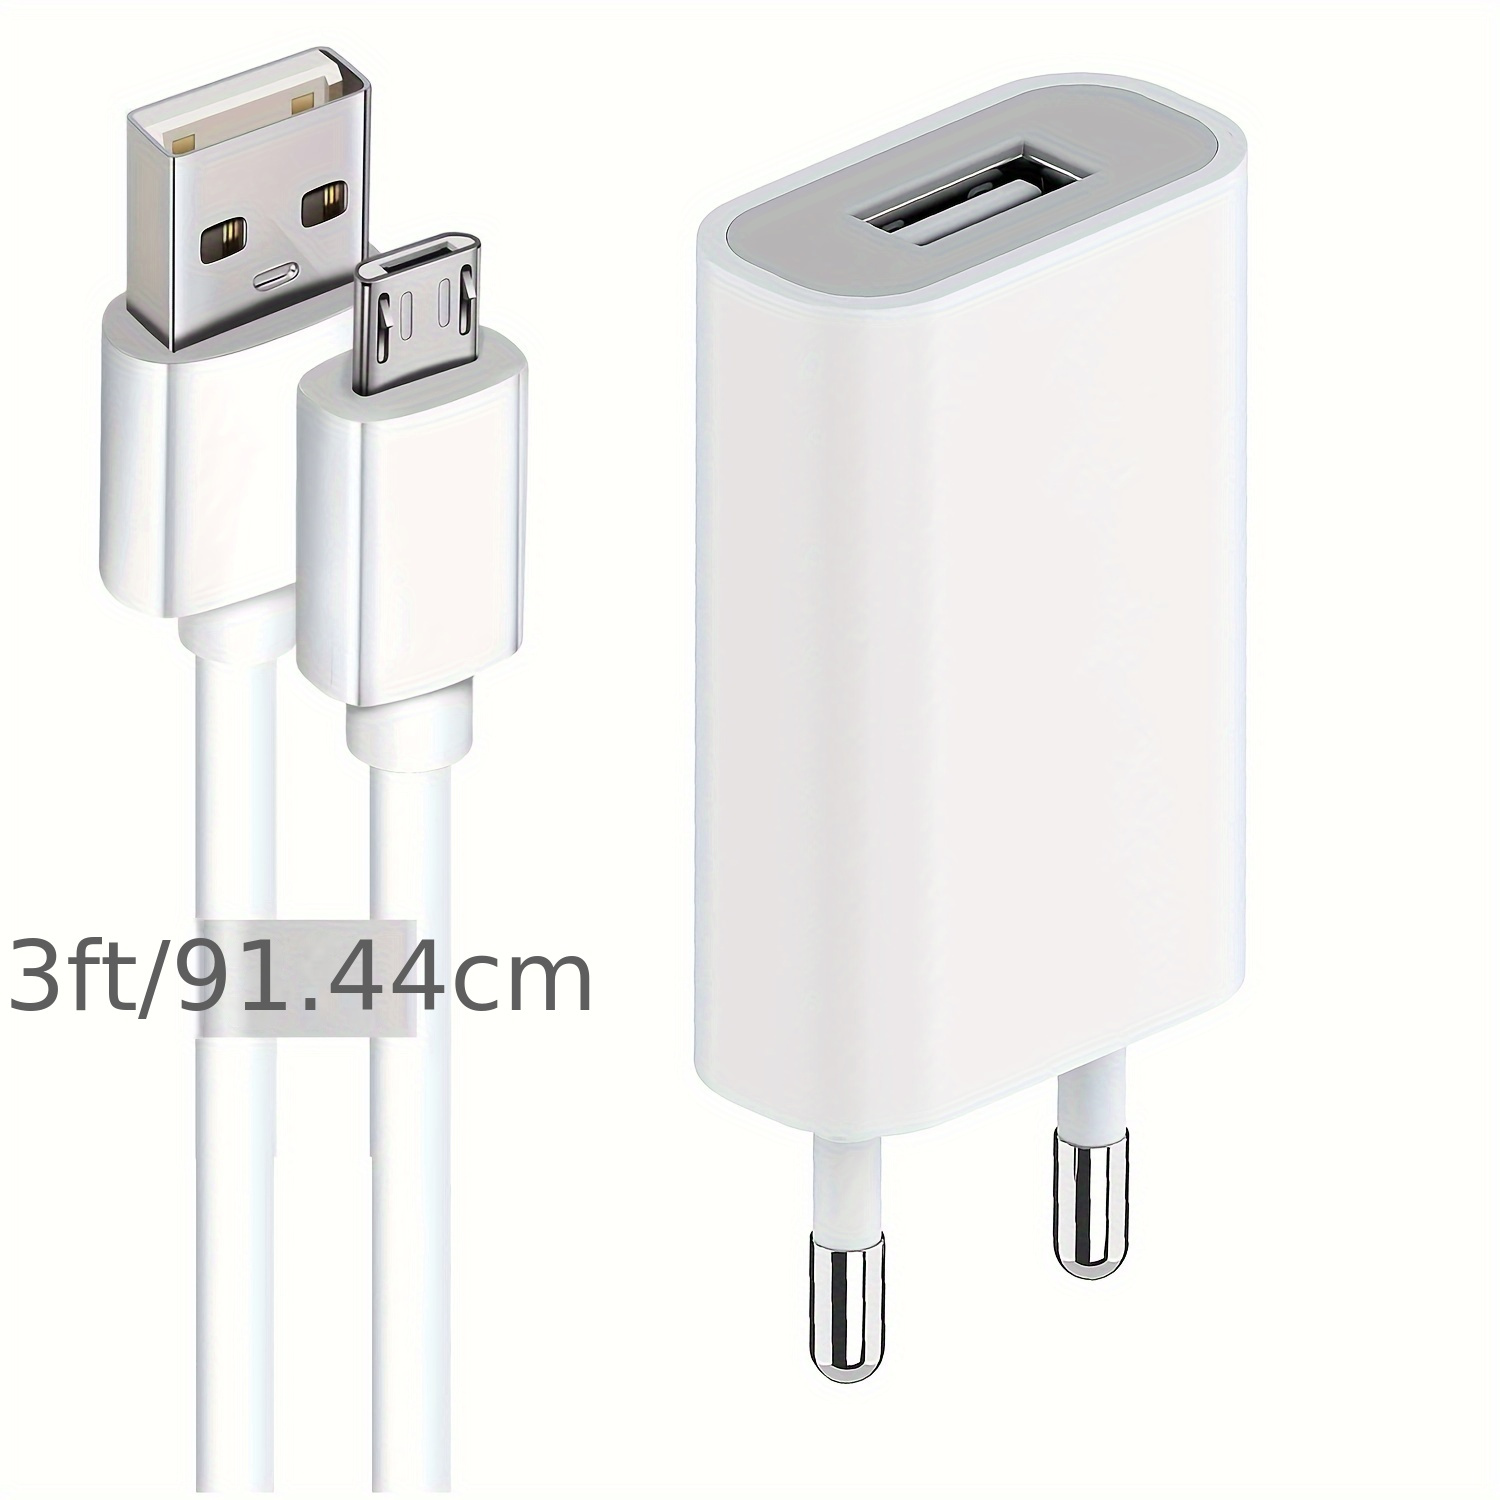 

1/2/3 Sets Eu Wall Mount Plug Charging Adapter, Micro Charging Cable 1m, Mobile Phone 5w 1a Charger, With Connecting Cable For Notebook 4 5,tab S2, Fire 7,lg K8 K30